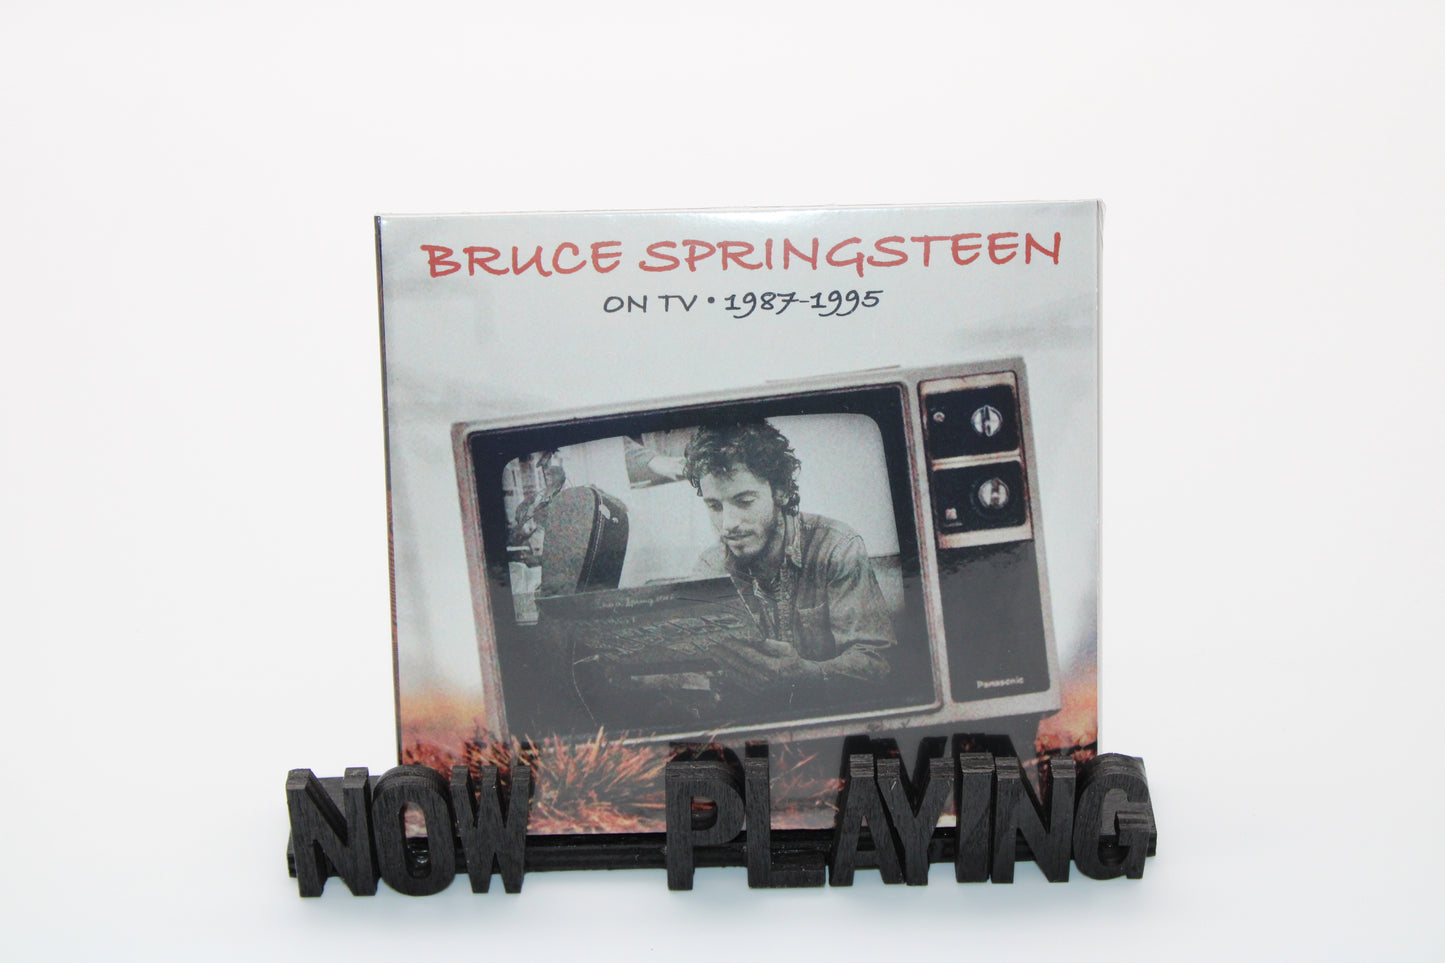 Bruce Springsteen SEALED "On TV 1987-1995" Sealed Import/CD Collectible